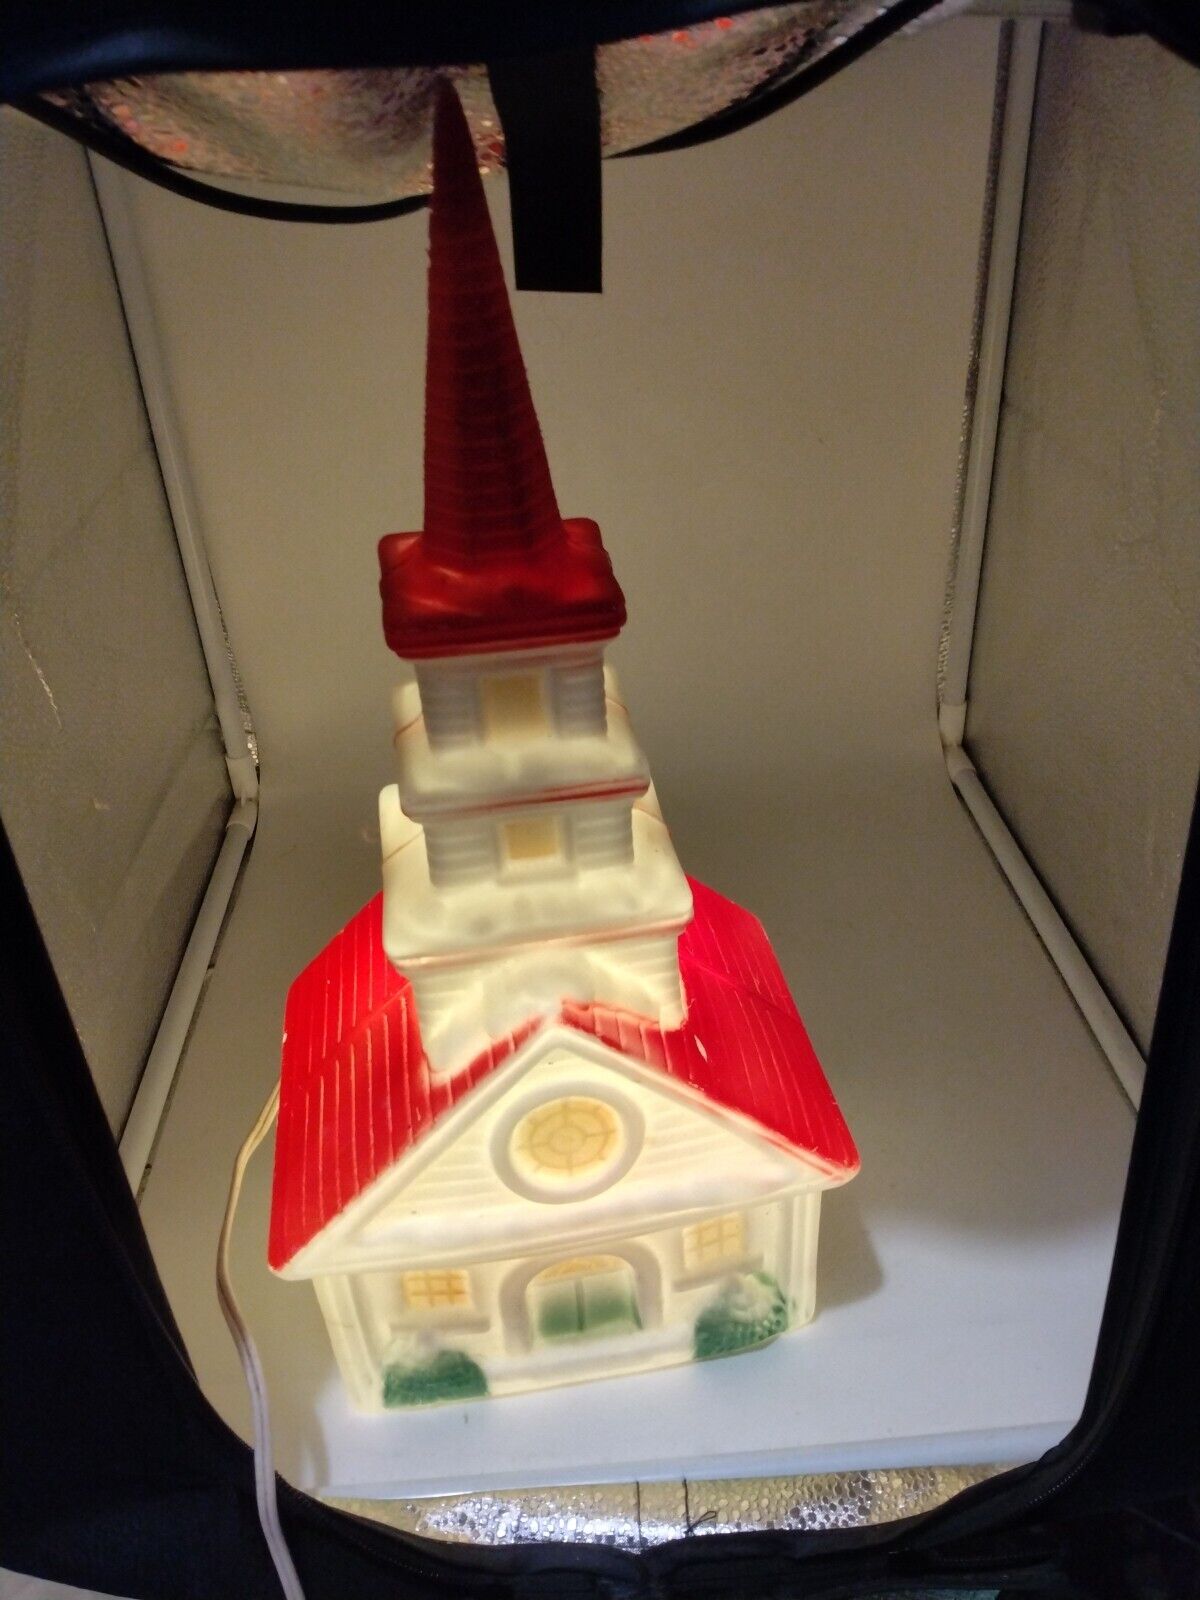 VTG 1960’s POLORON 15” LIGHTED CHURCH WITH STEEPLE BLOW MOLD LIGHT CORD WORKS